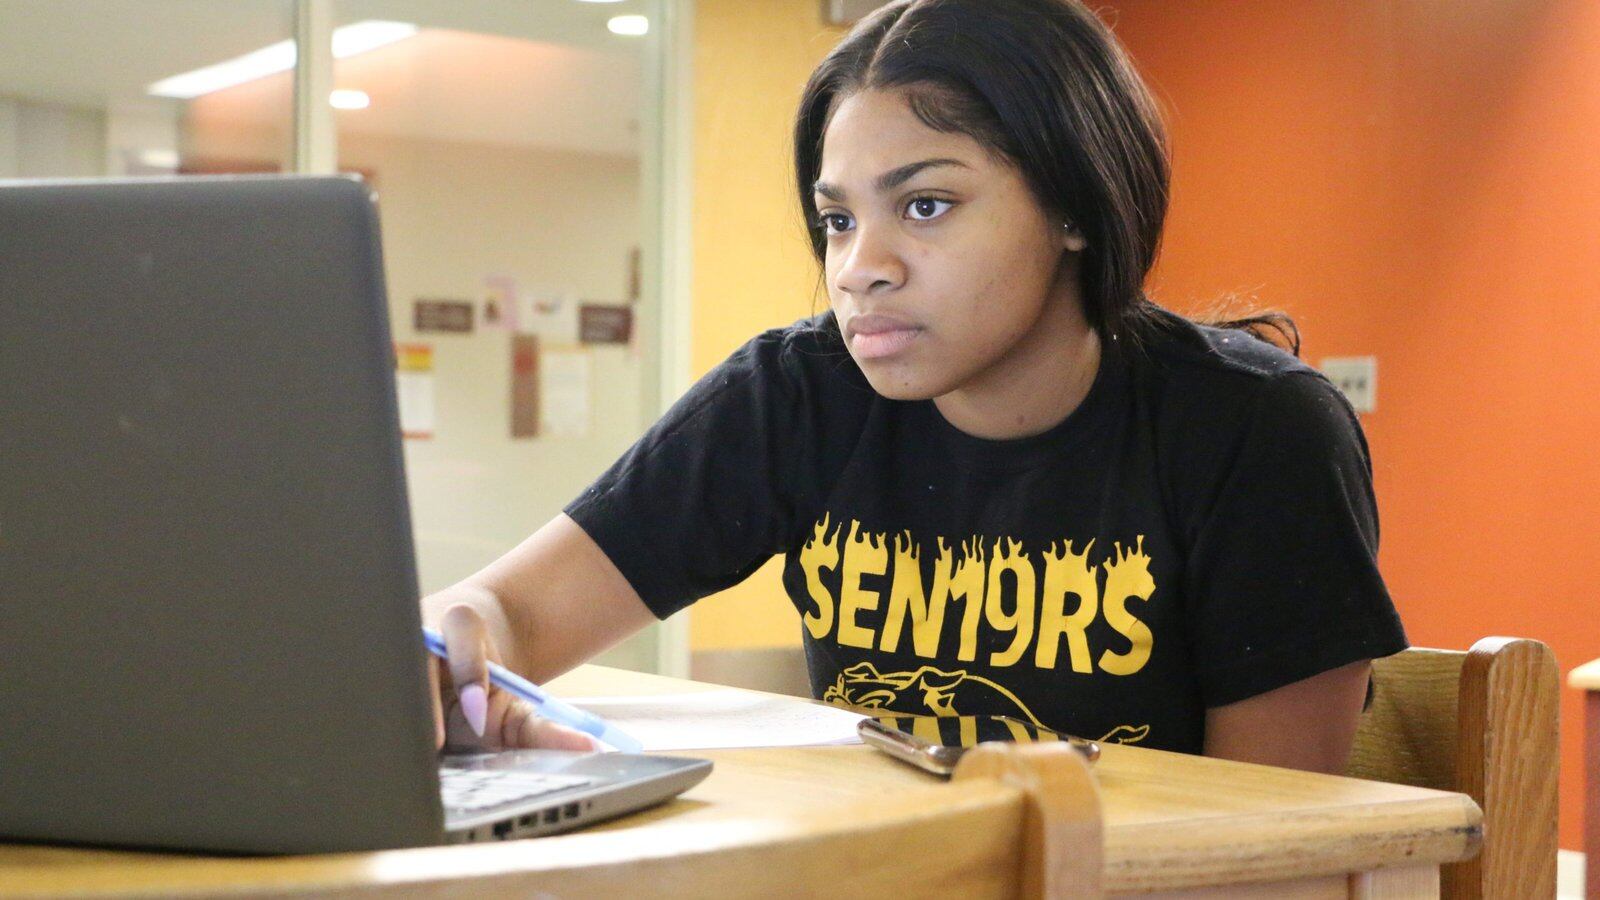 Like a growing number of college students, JaniQua Guiste is enrolled in a math class that uses technology to catch up students who enter behind.